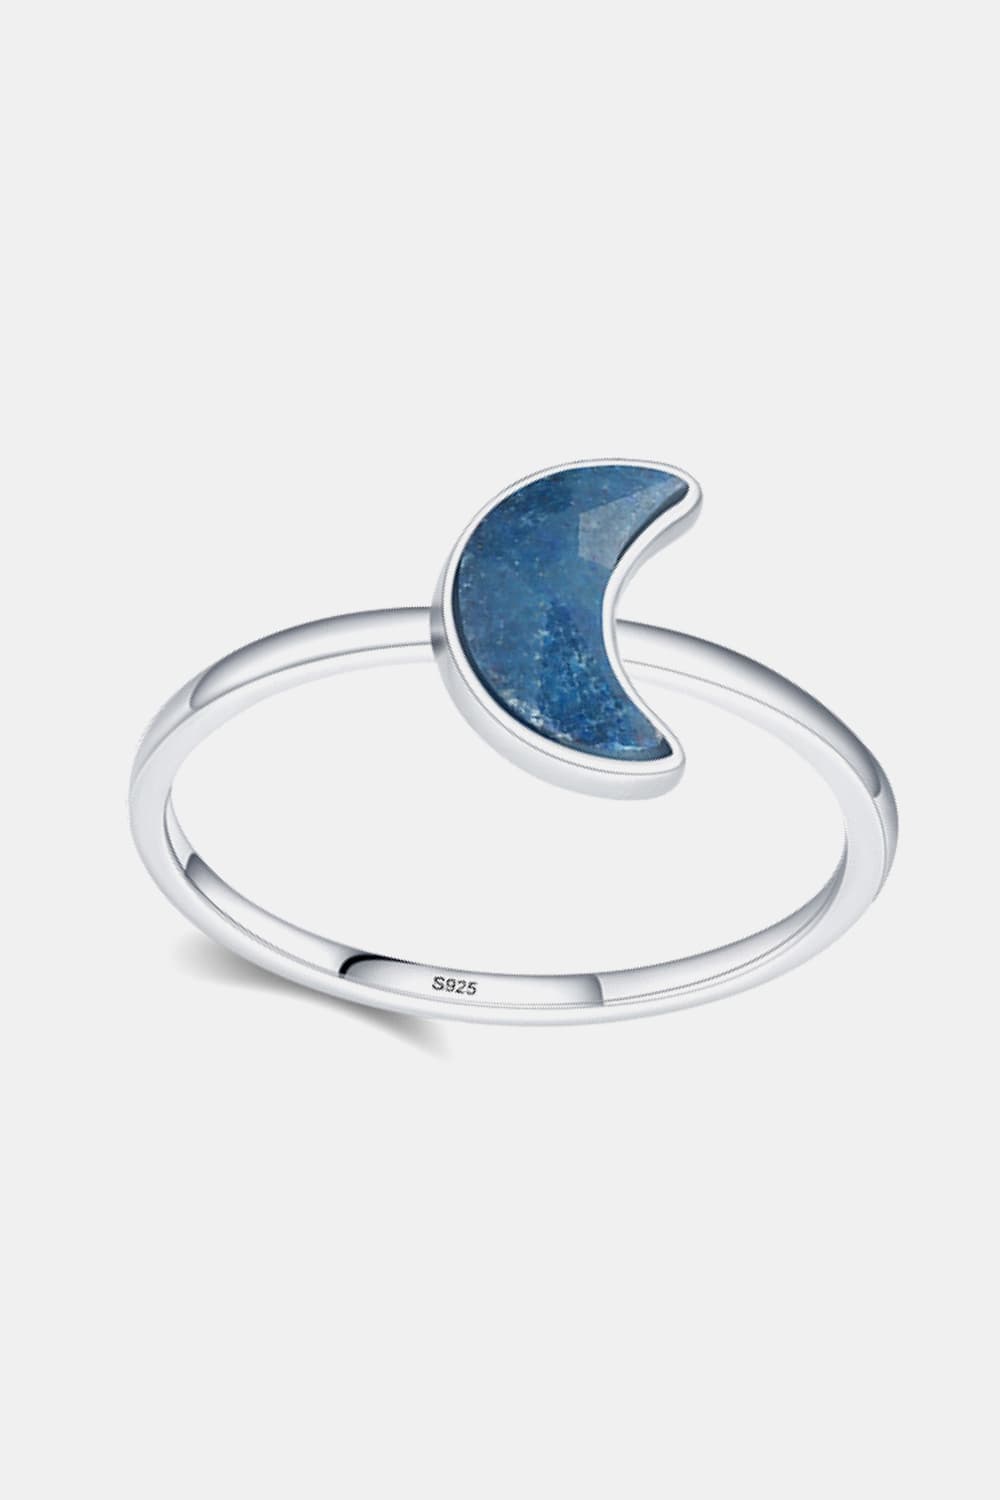 925 Sterling Silver Moon Shape Aventurine Ring - Coco and lulu boutique 